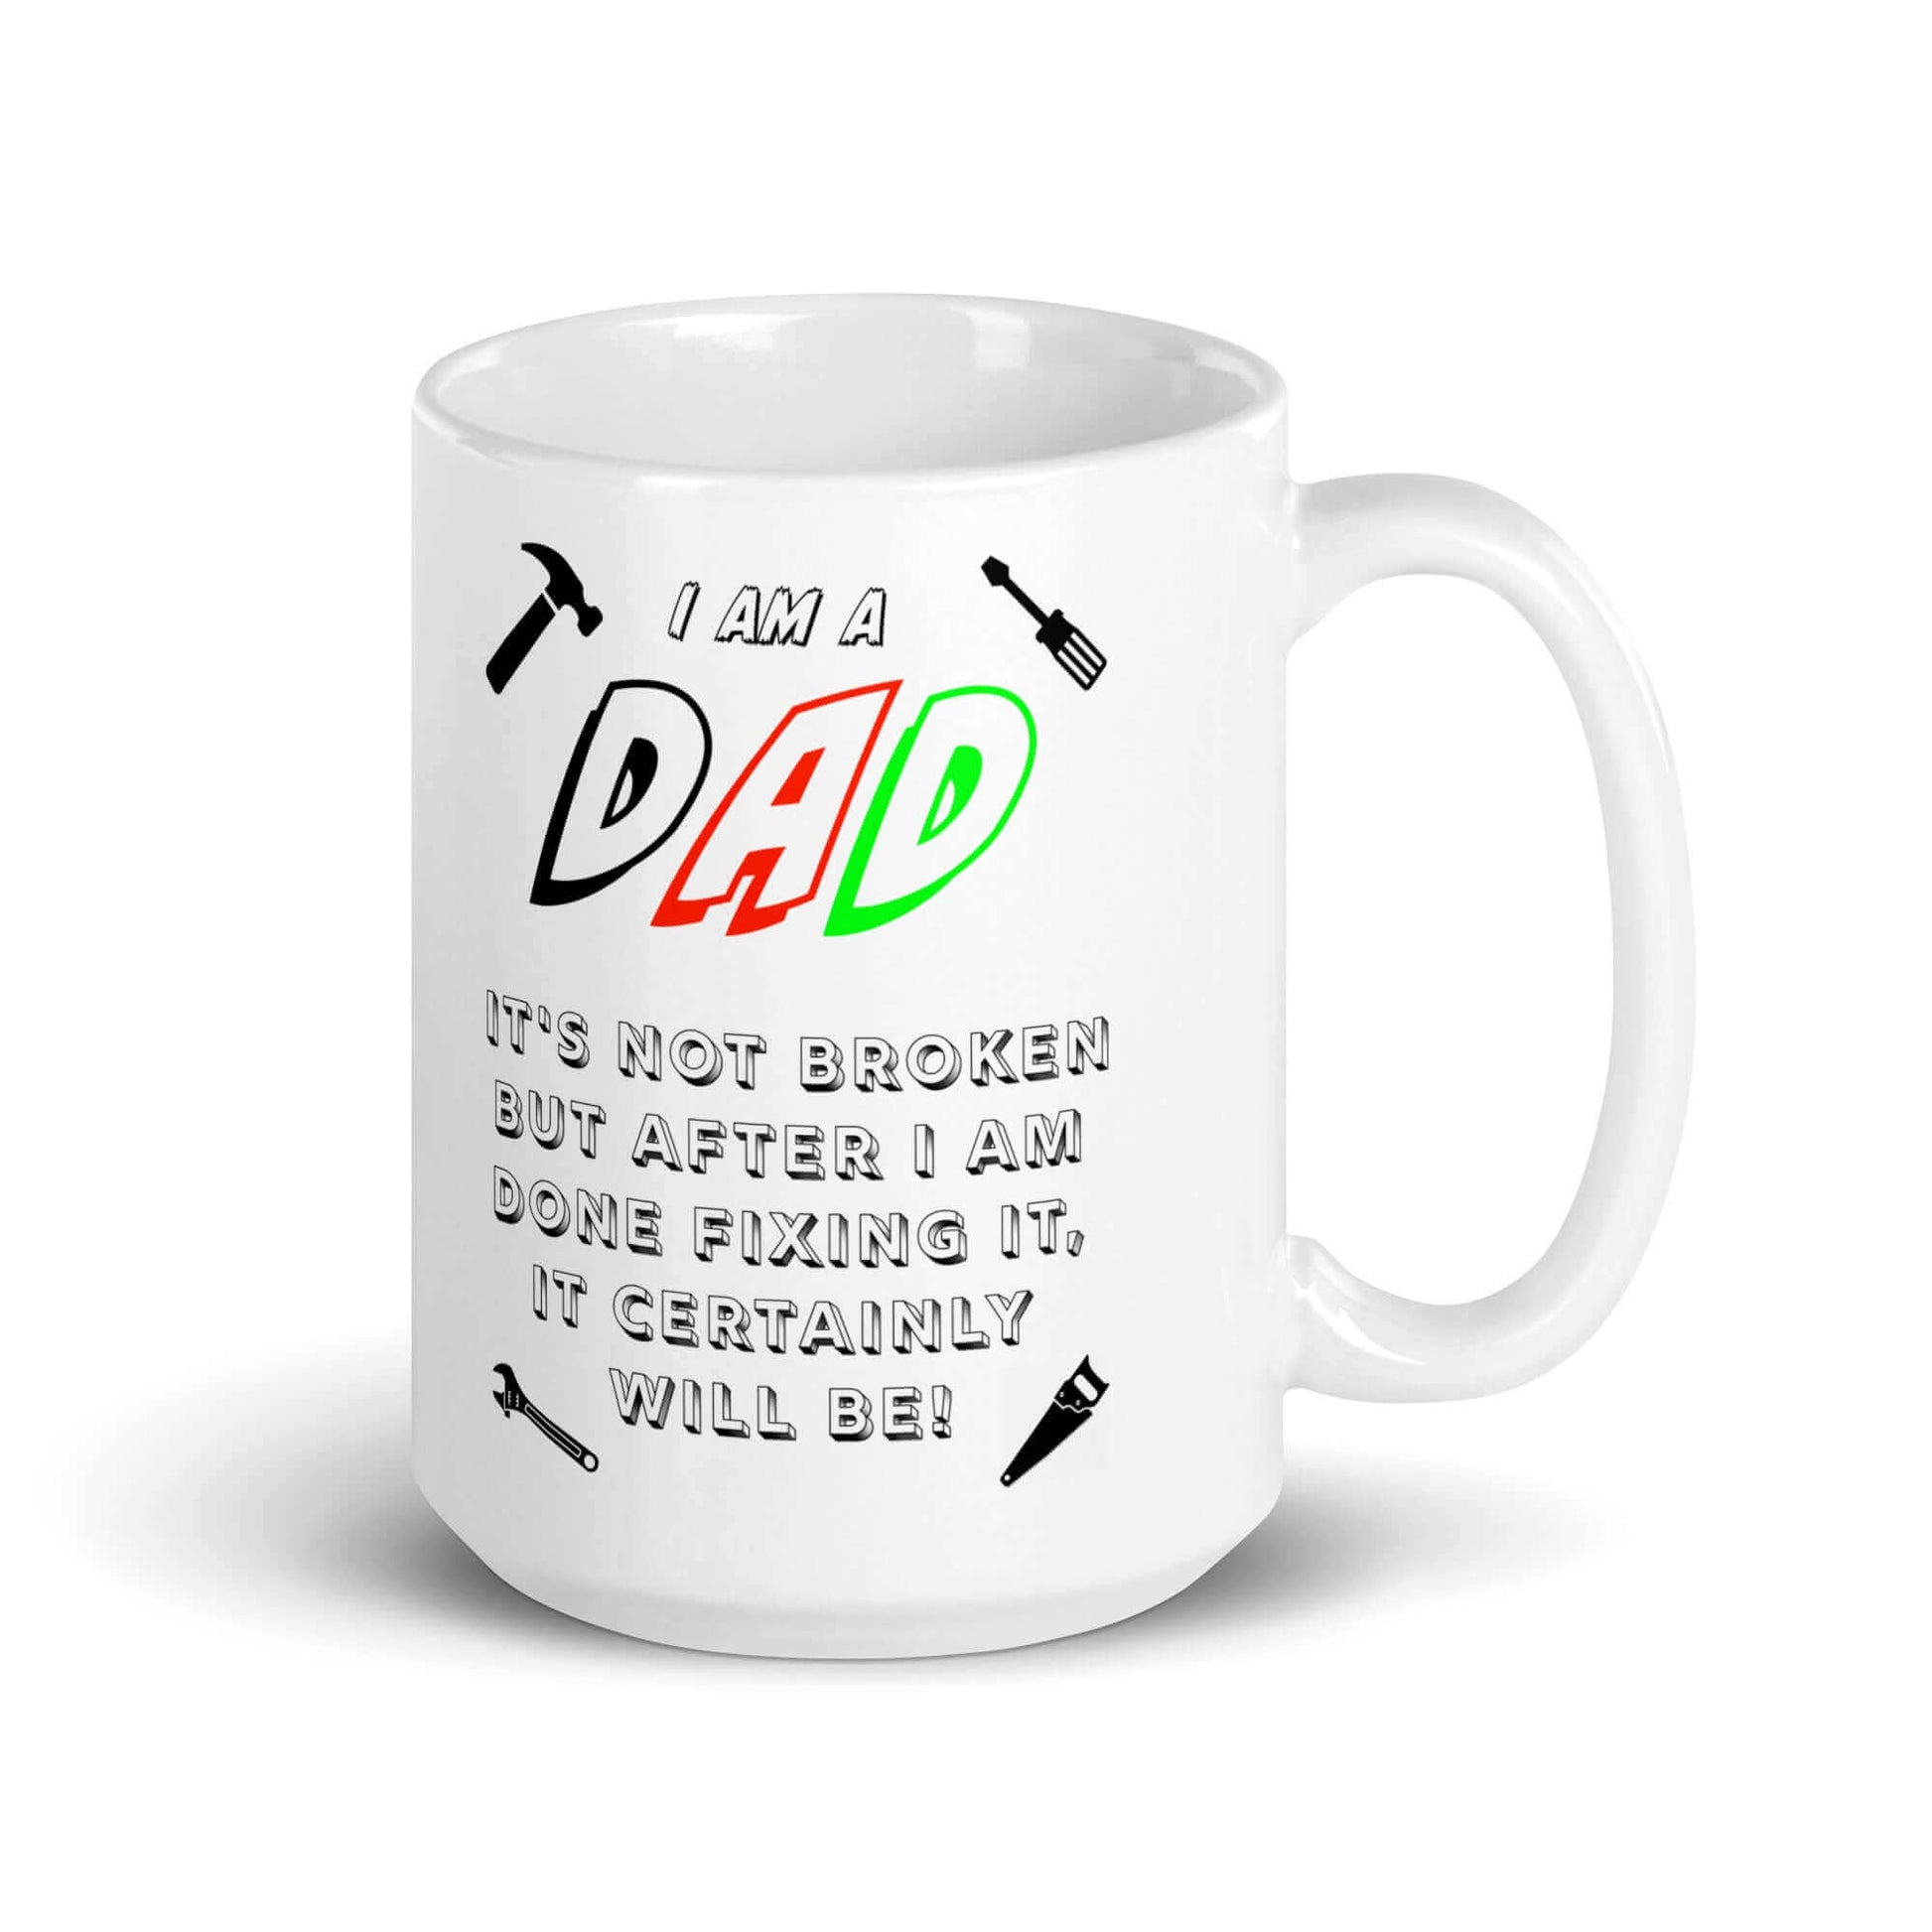 I am a DAD. It is not broken, but after I am done fixing it, it certainly will be ! - White glossy mug adult mug coffee mug dad dads day dads day gift dishwasher safe mug Fahters day fathers fathers day fixing funny coffee mug funny mug gift for dad gift idea mug super dad